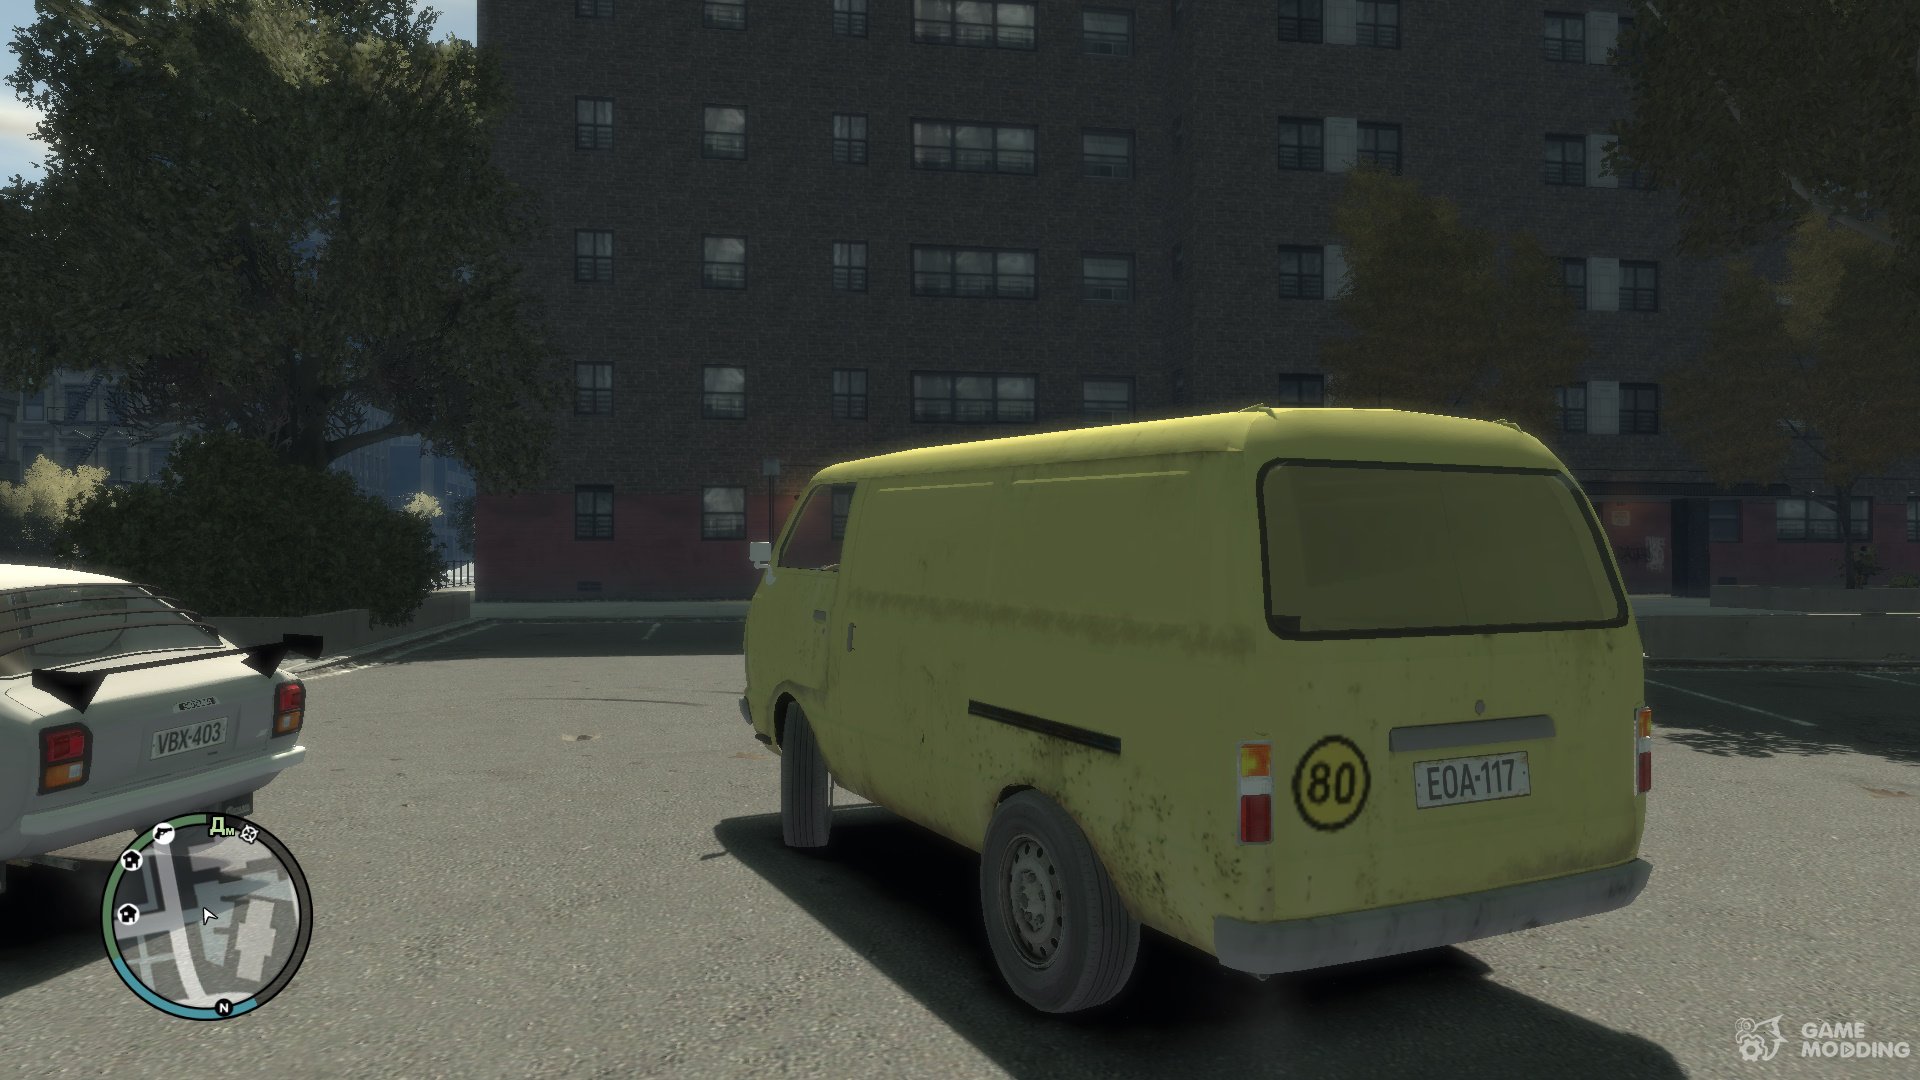 Hayosiko Pace from My Summer Car V1.2 for GTA 4